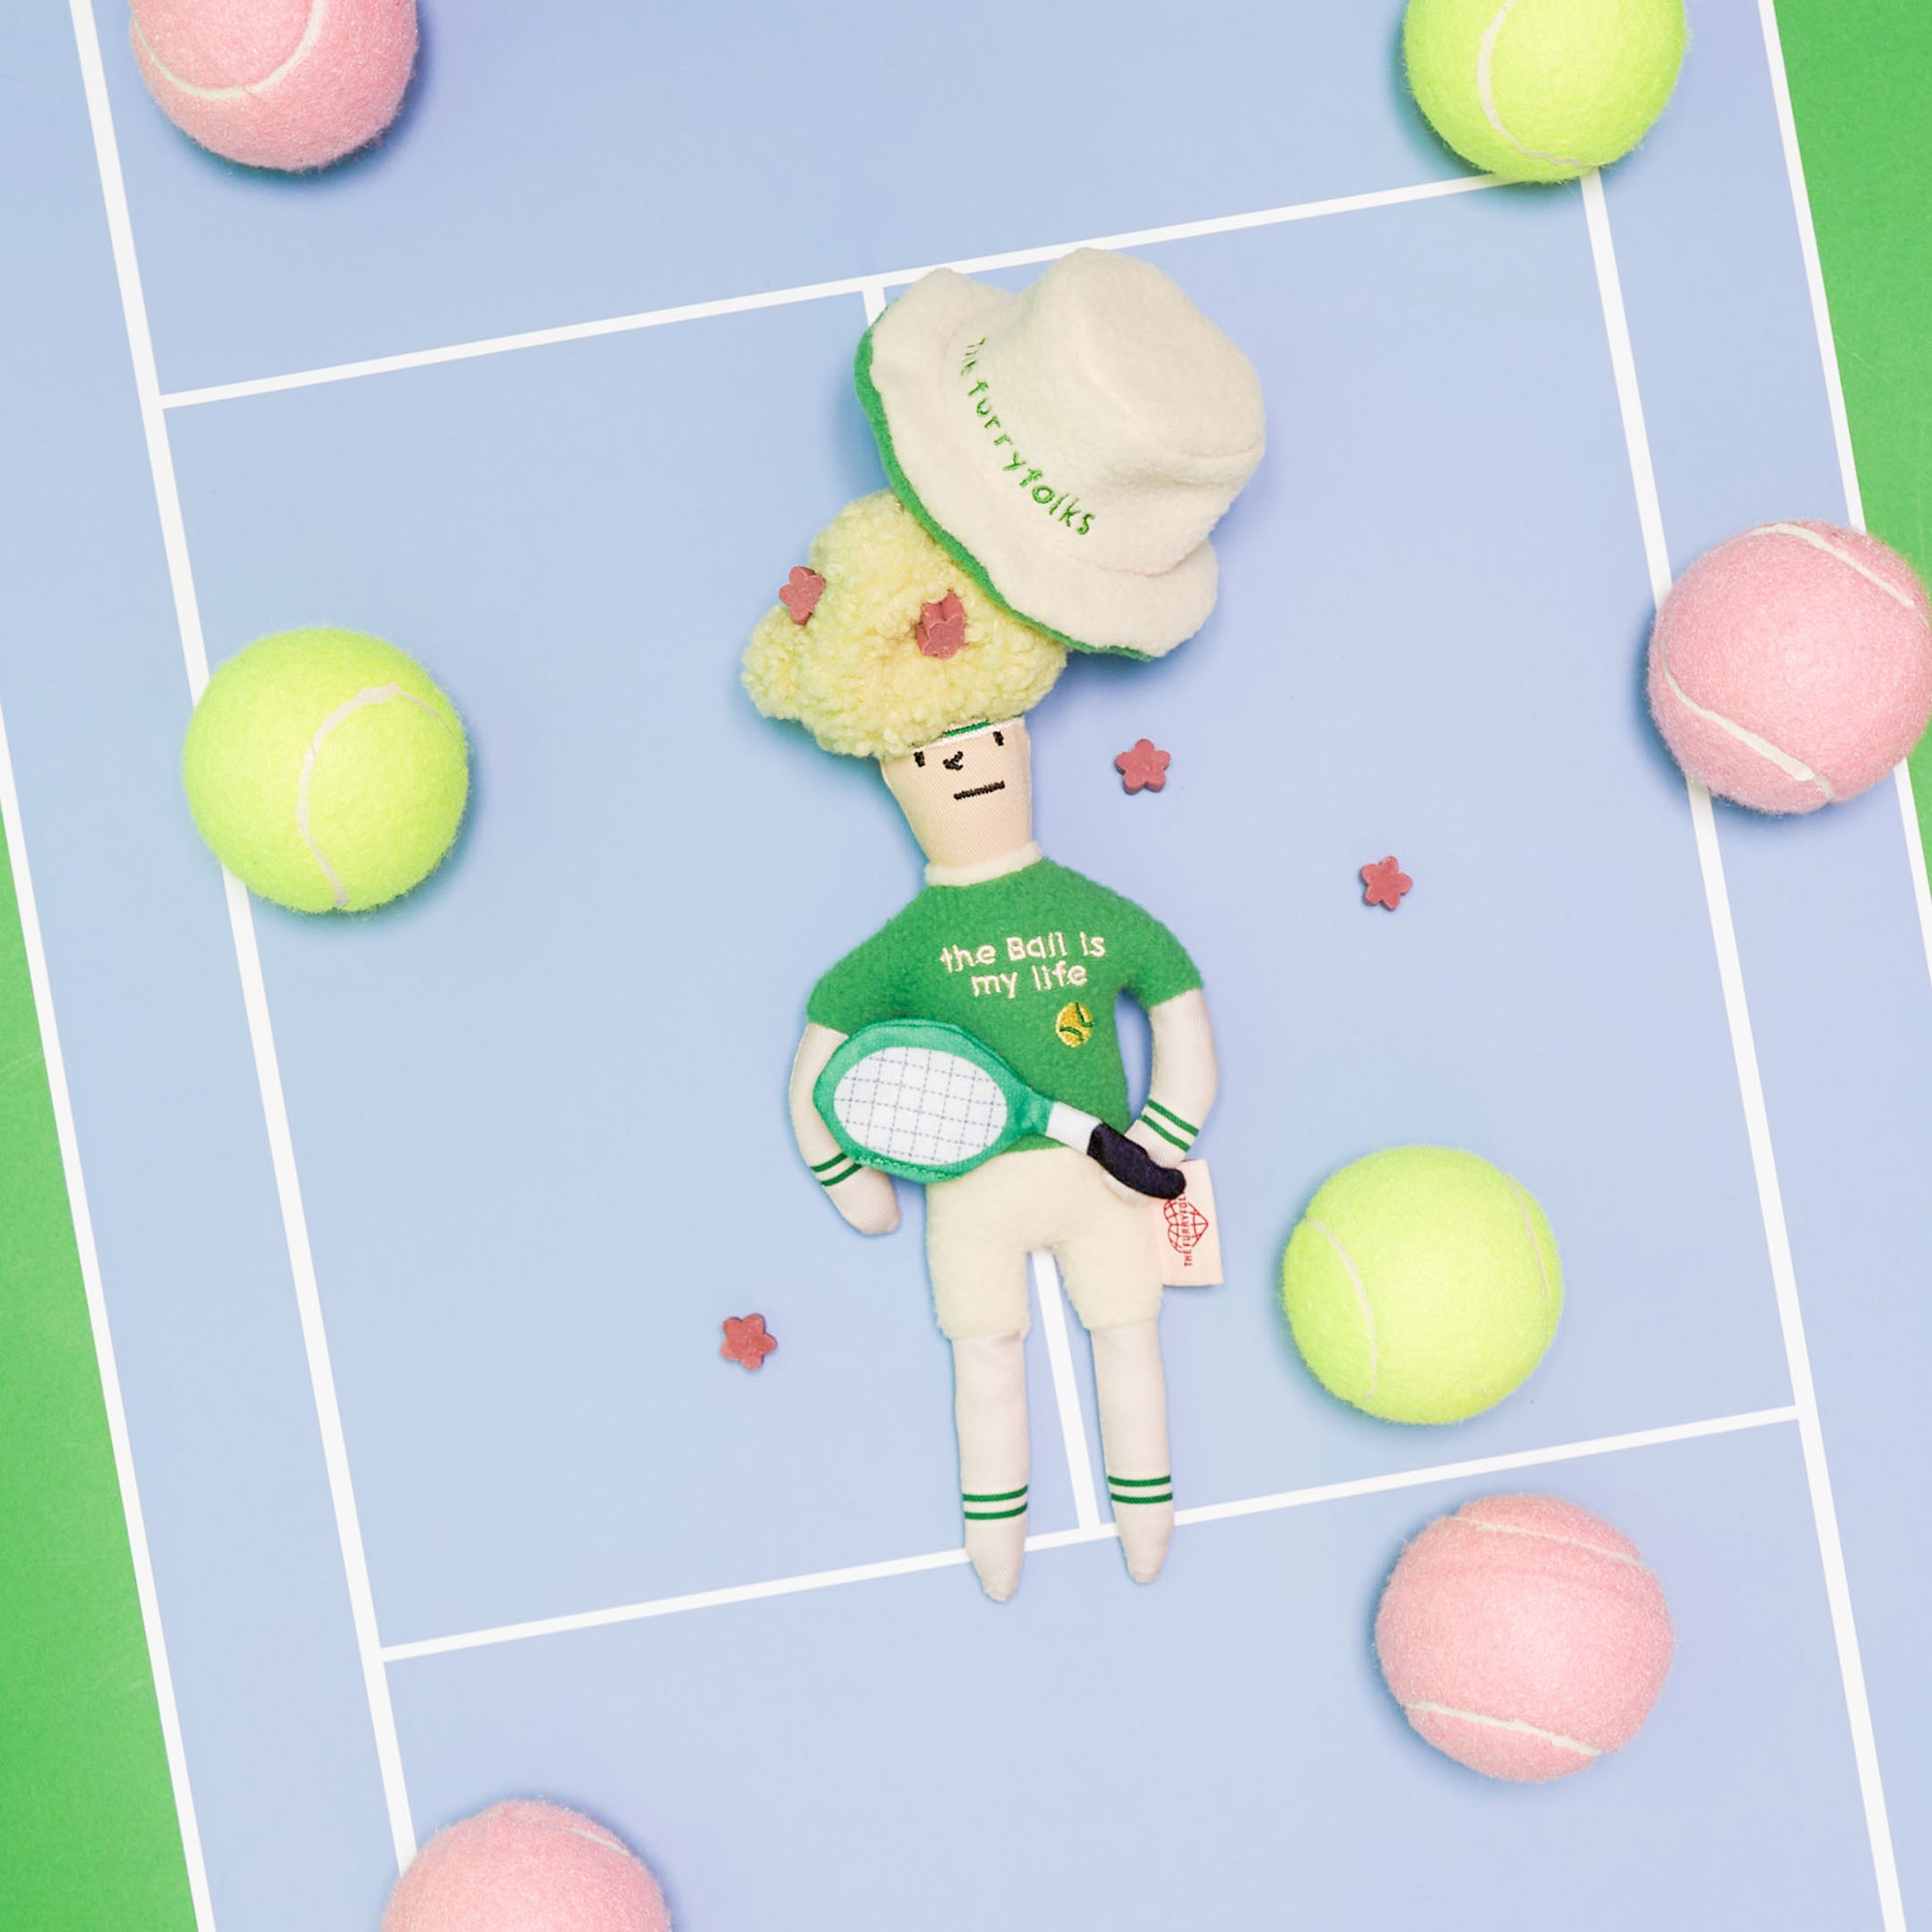 The image features a plush toy styled like a tennis player lying flat on a surface that resembles a tennis court, marked with blue and green lines. Surrounding the toy are various plush tennis balls in green and pink hues and small plush flower accents scattered about. The toy itself has a large, green hat labeled "the furryfolks," a green sweater with "the ball is my life" on the front, and holds a tennis racket. Its face is simple with stitched features, adding to the toy's playful charm.